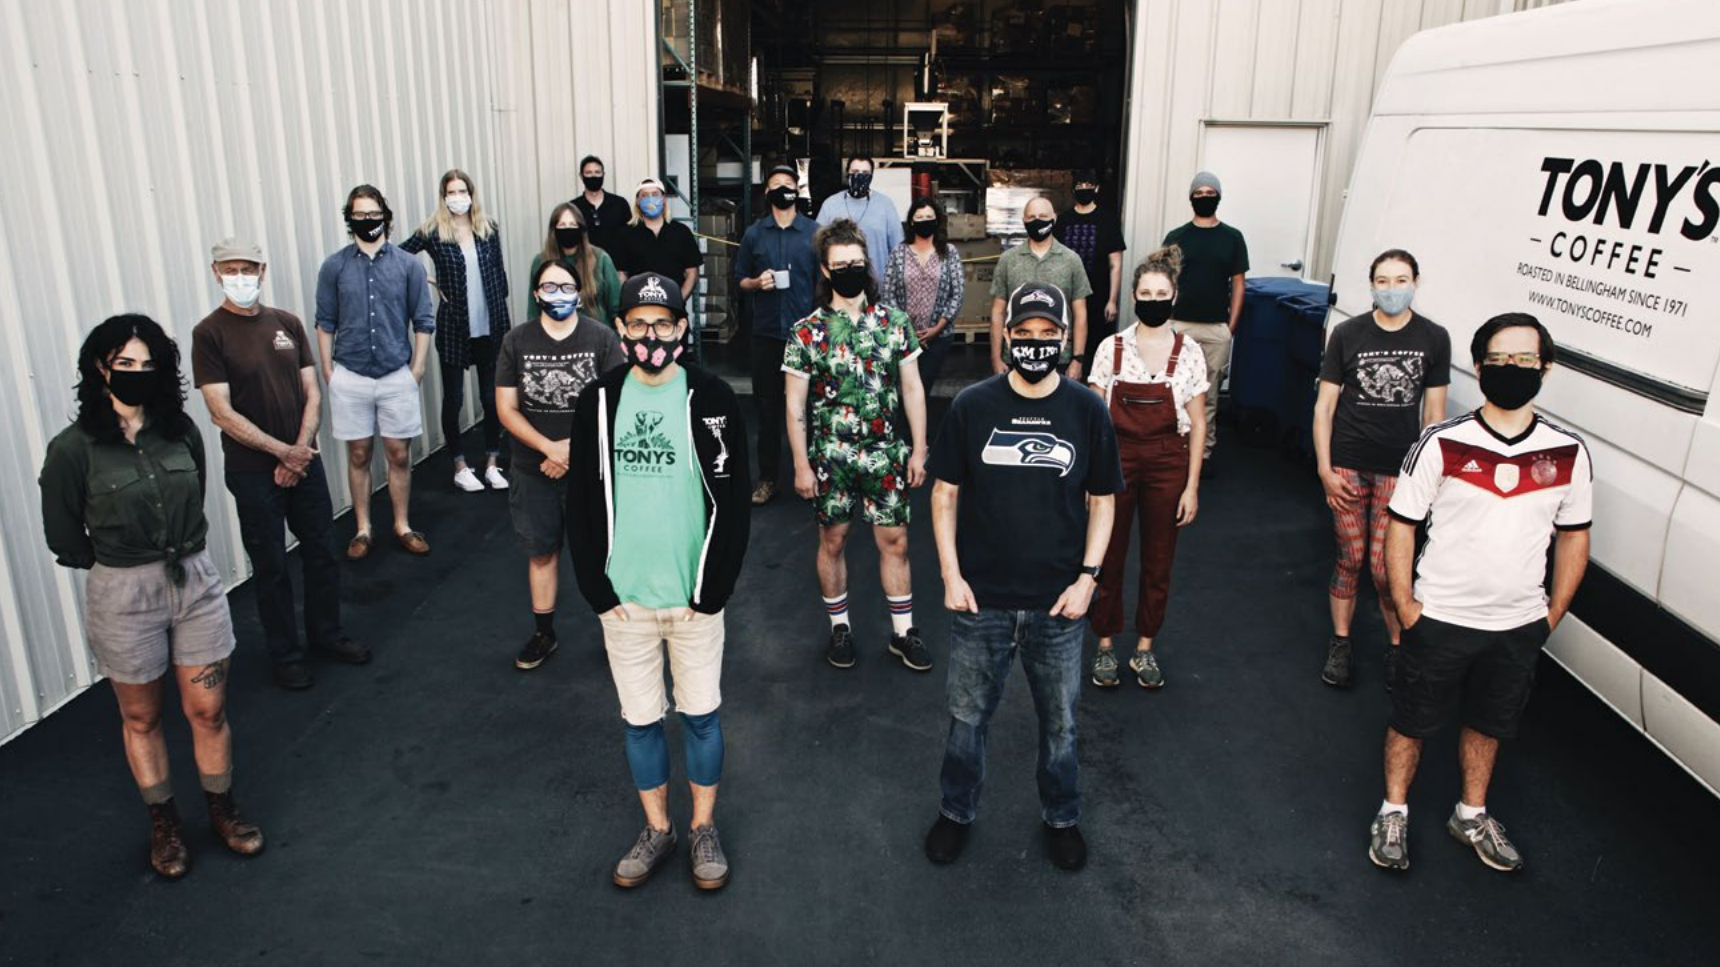 The Tony's Coffee team, wearing masks and standing in front of the warehouse.